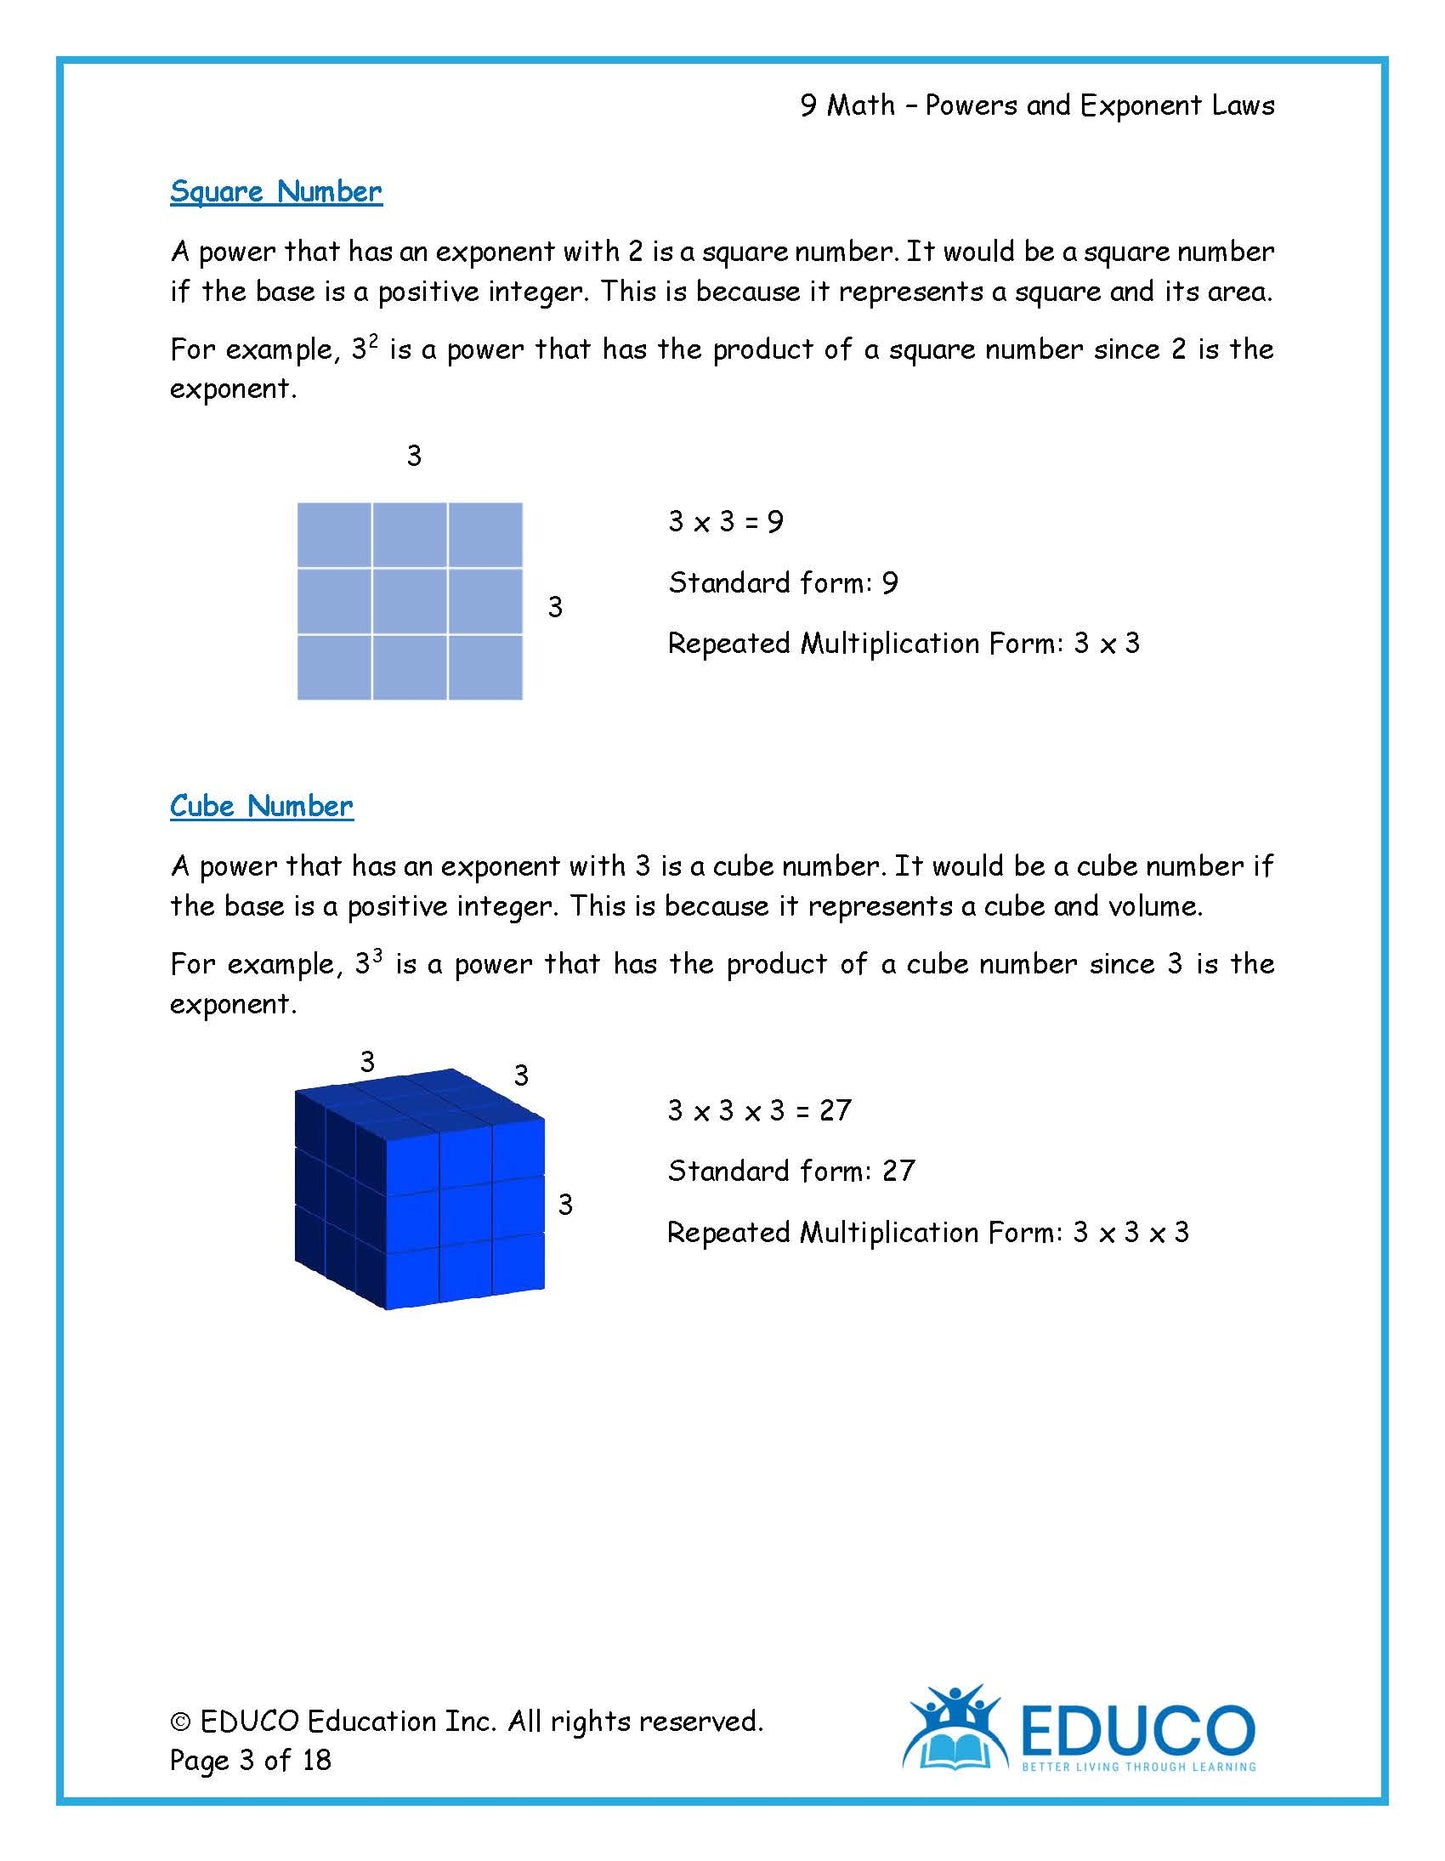 Unit 2: Powers and Exponent Laws - Grade 9 Math (Digital Download)